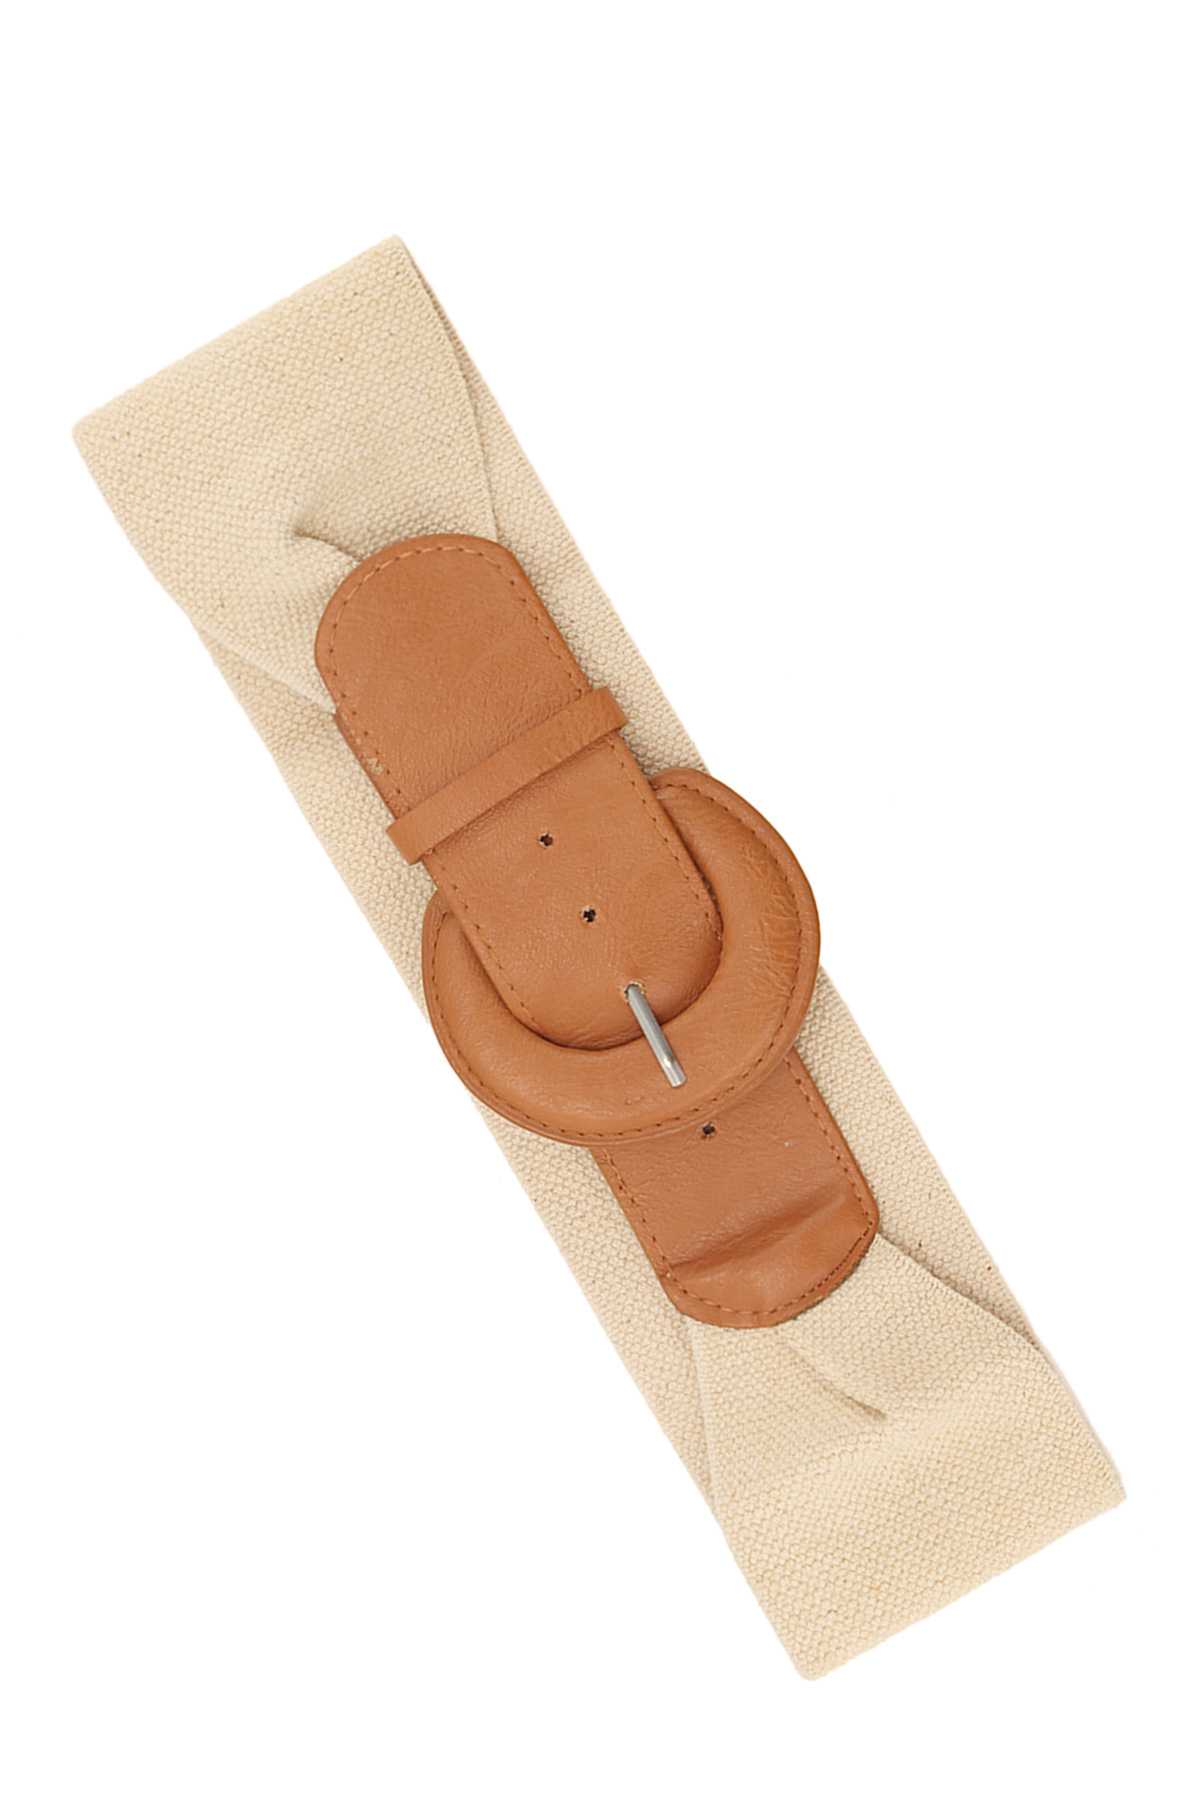 Rounded Buckle Stretchable Belt